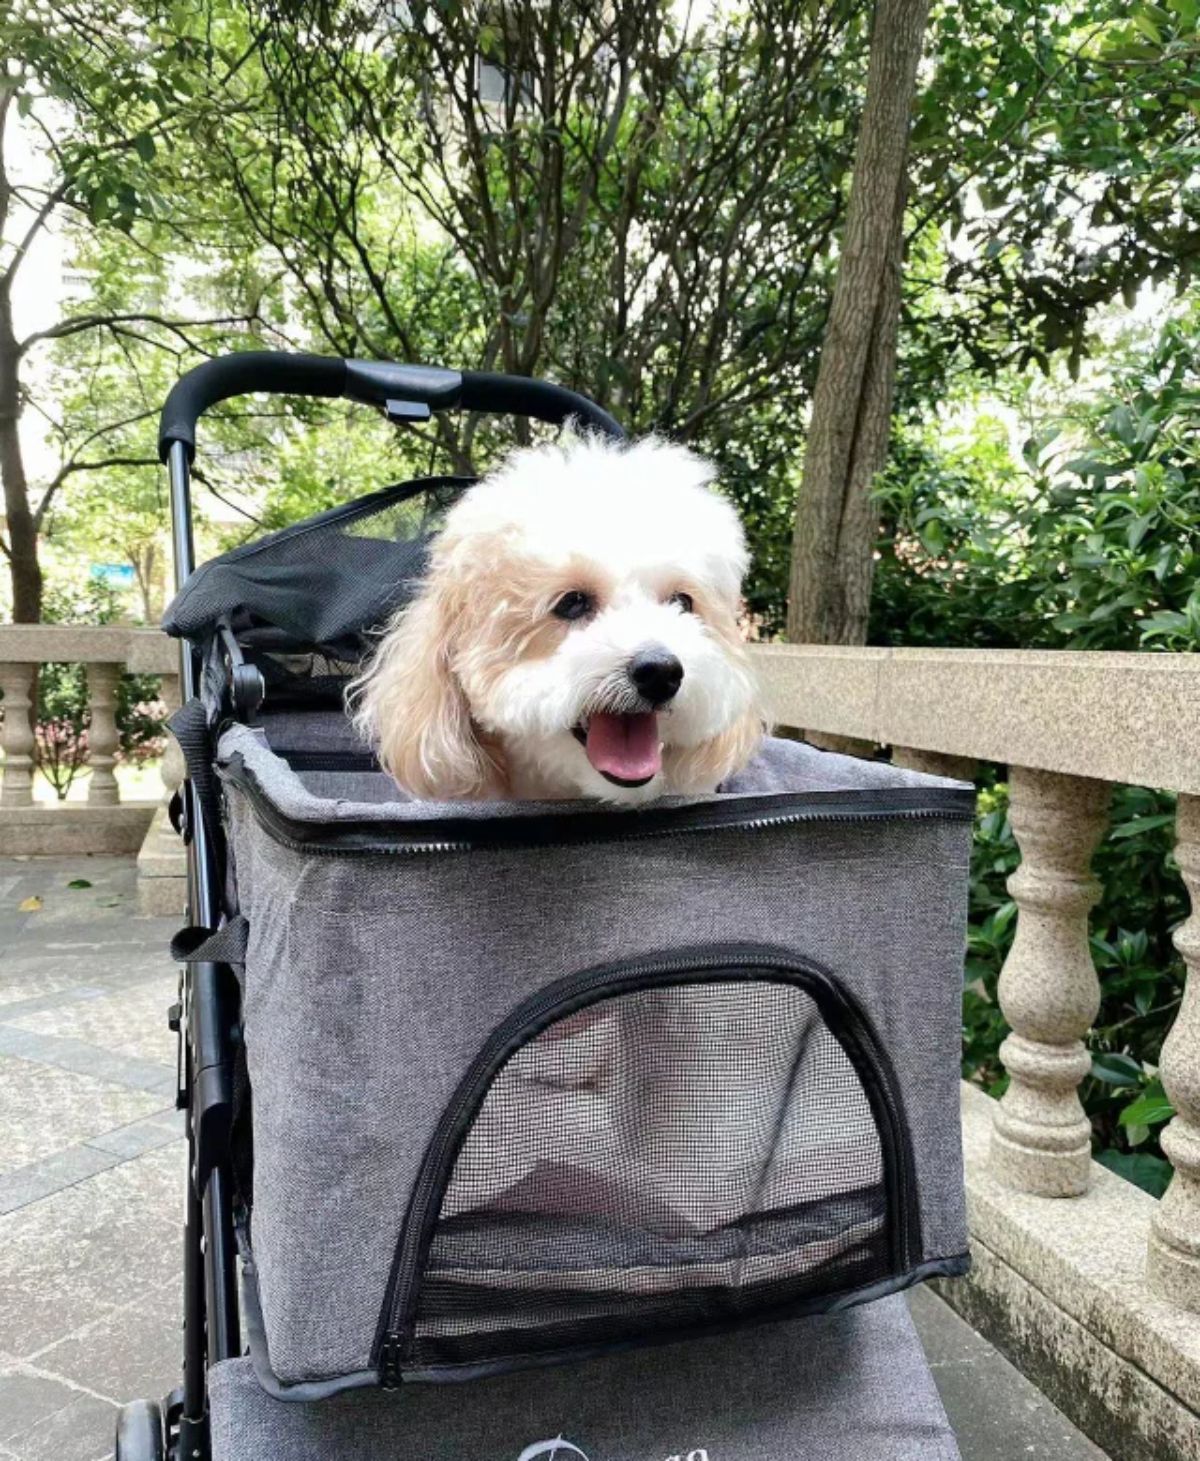 smiling fluffy brown and white dog in a baby stroller